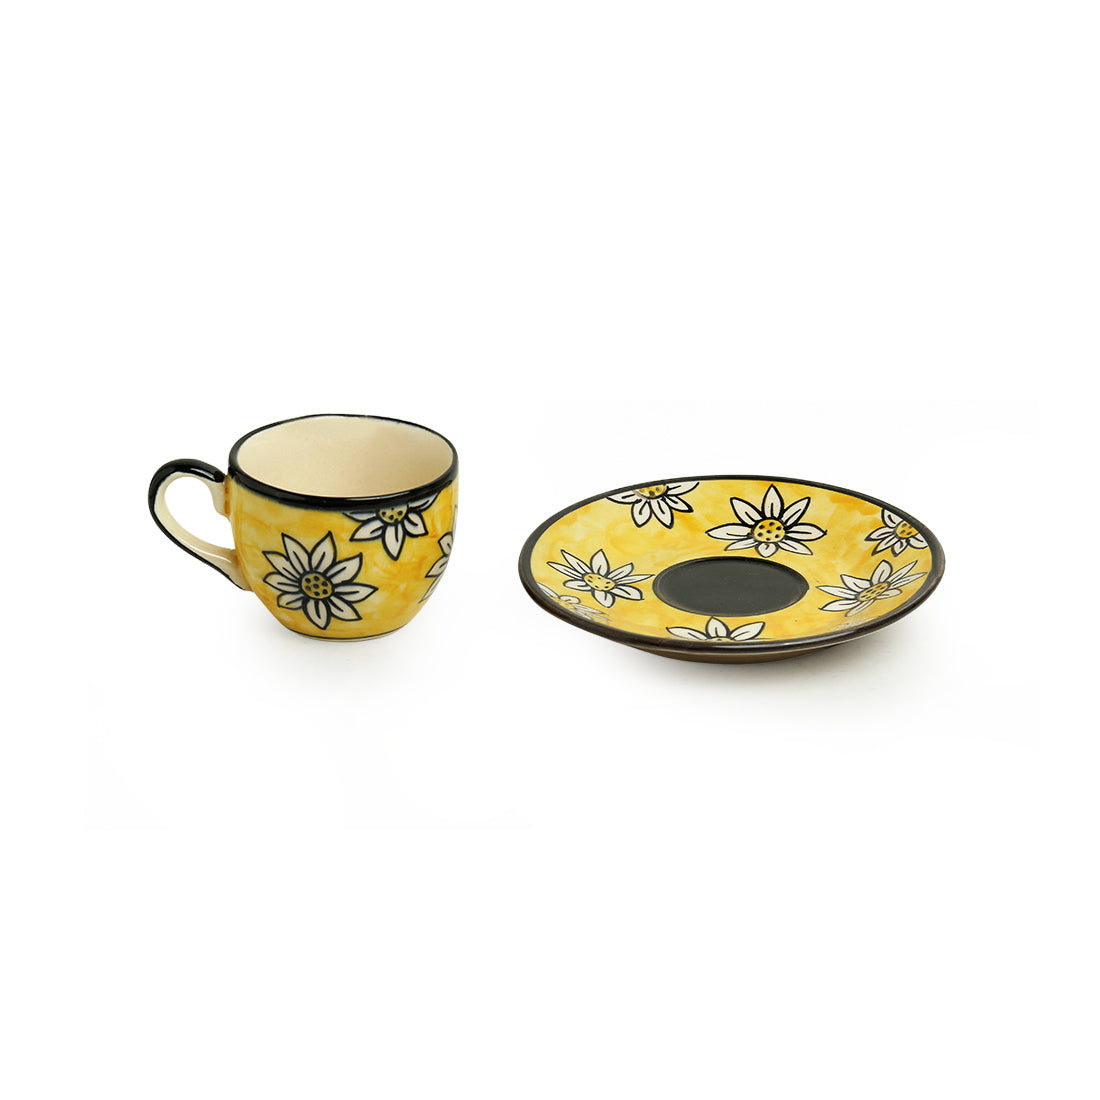 'Californian Sunflowers' Handpainted Ceramic Tea Cups With Saucers (Set Of 6, 200 ML)